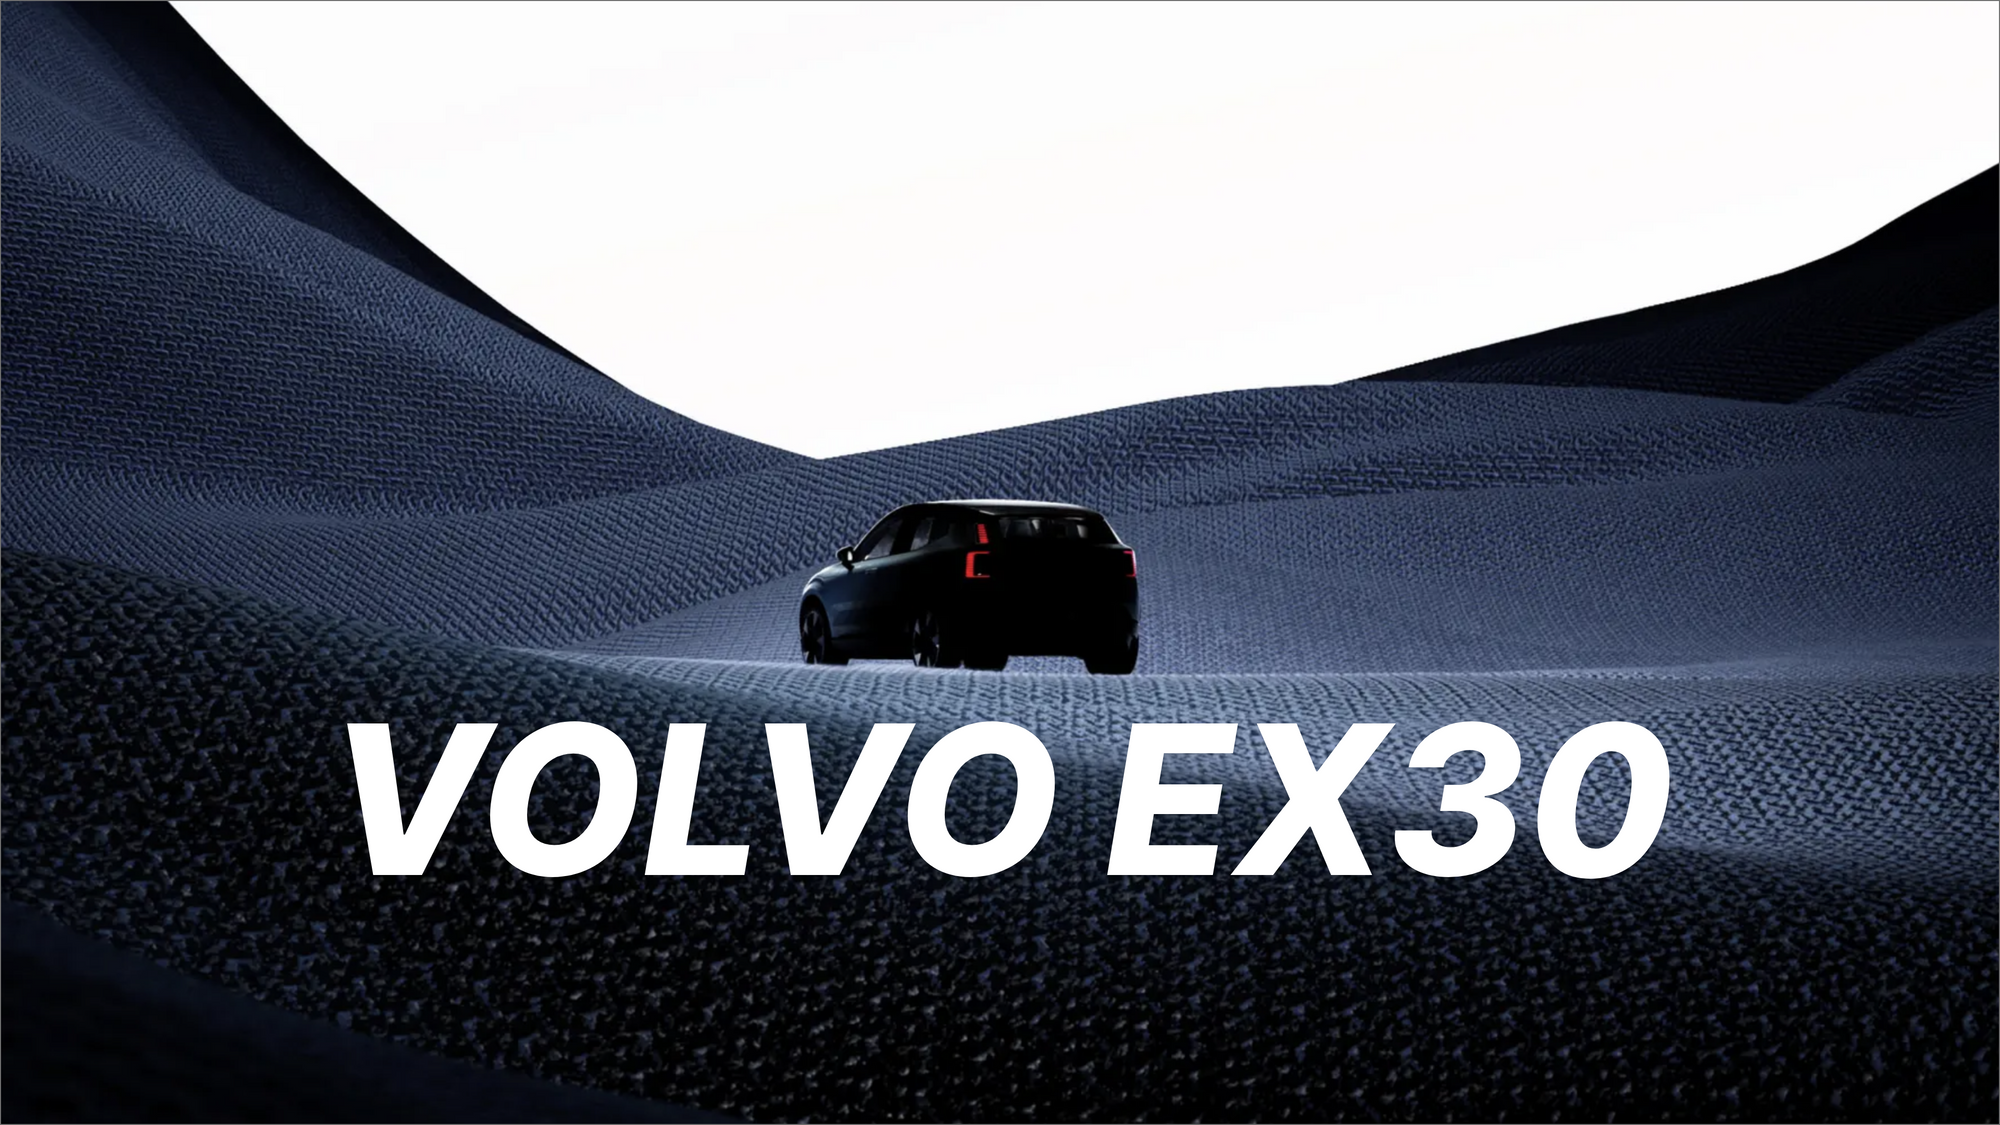 Volvo EX30: A Compact SUV With Big Electric Power Teaser!